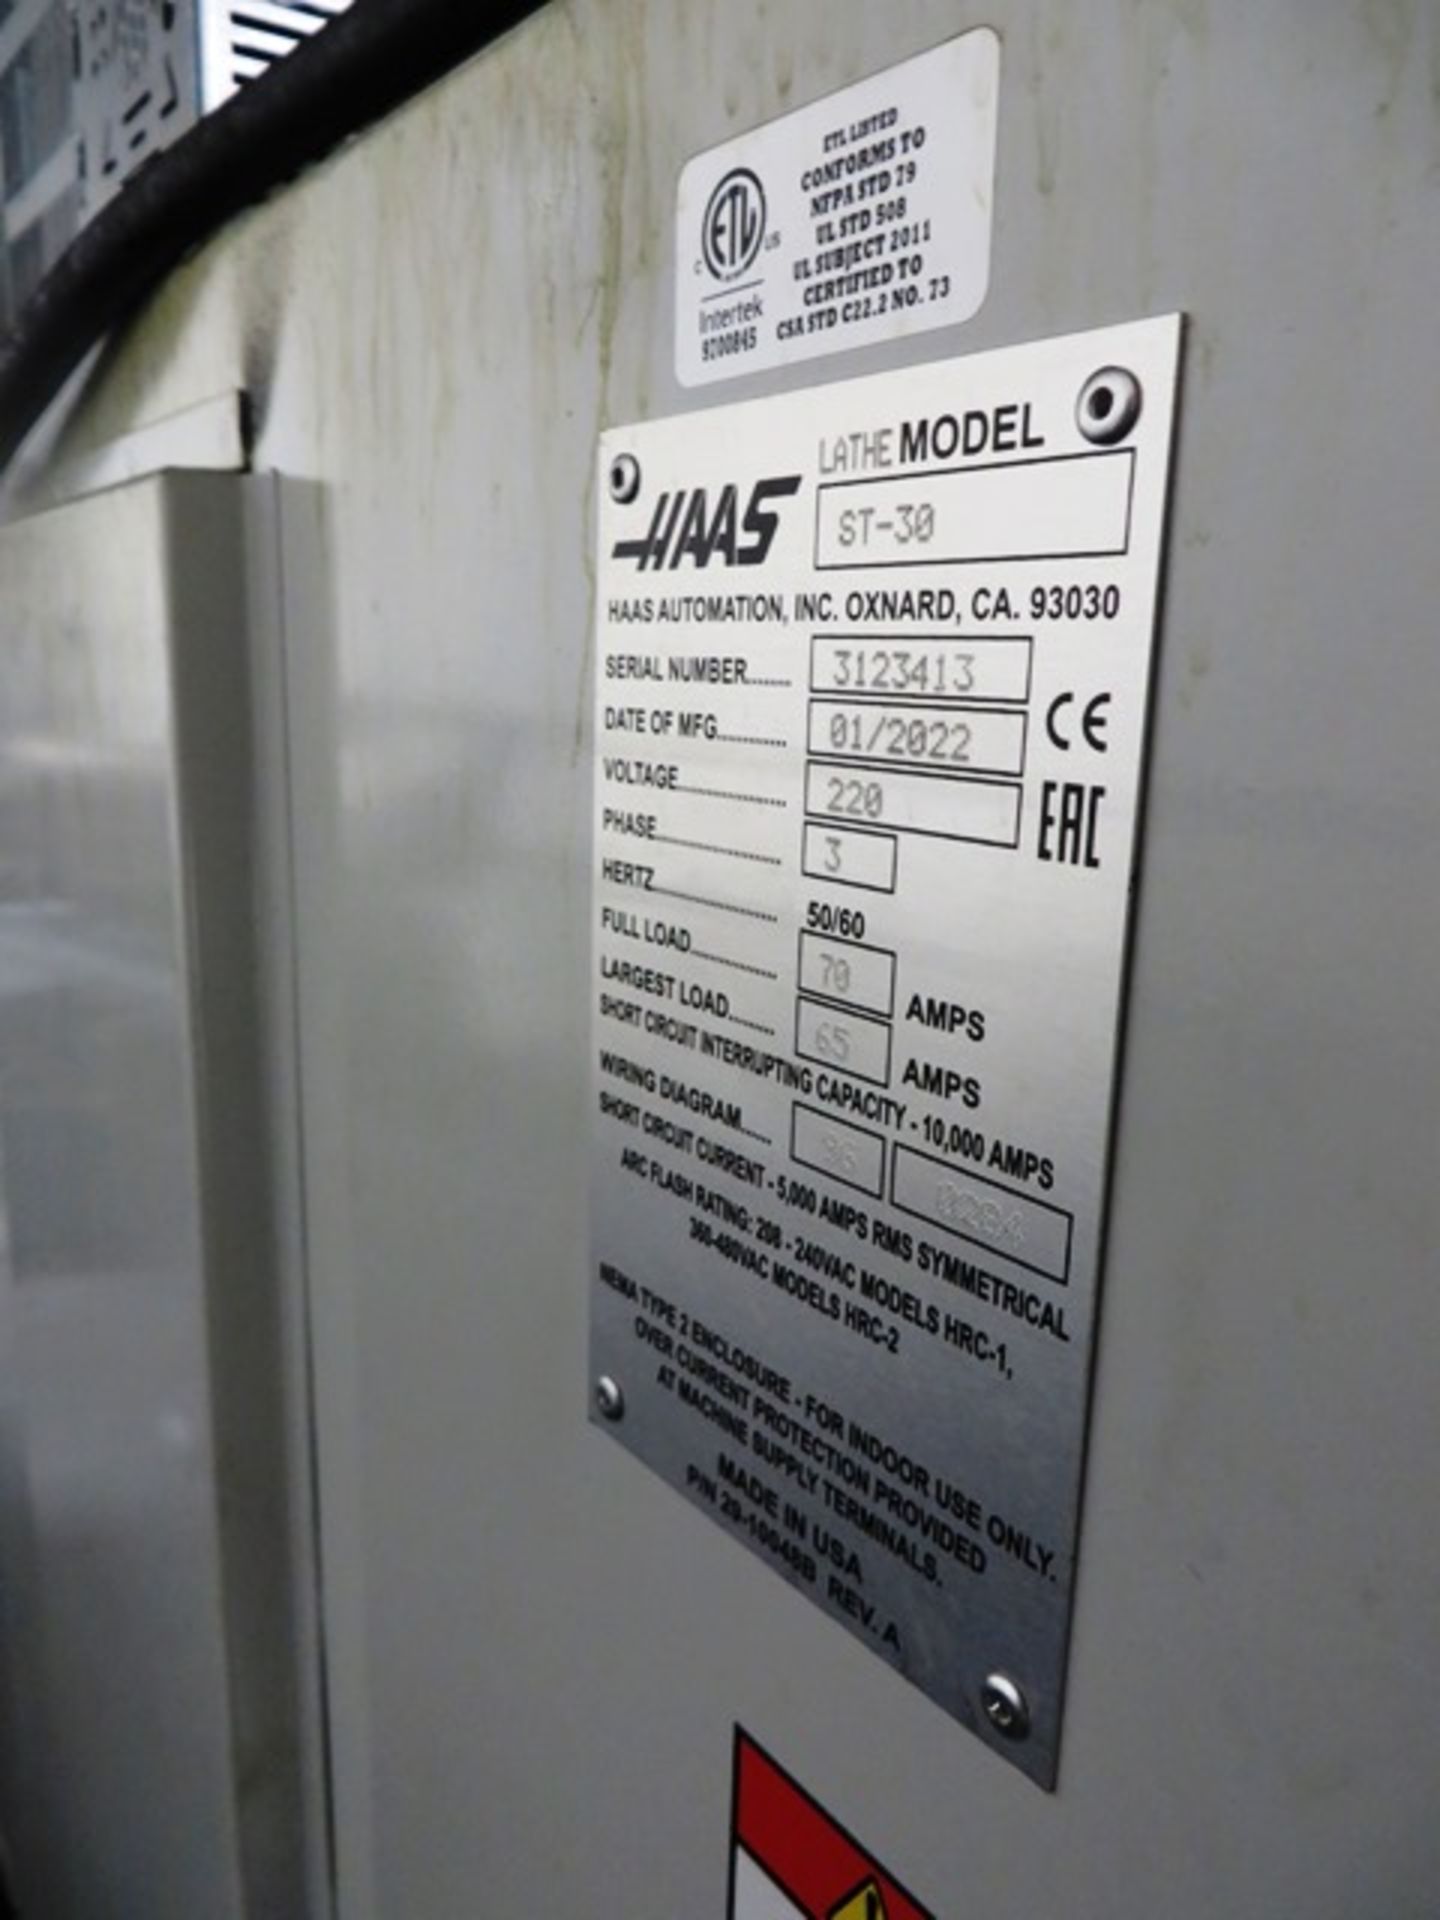 Haas ST-30 CNC Turning Center - Image 7 of 7